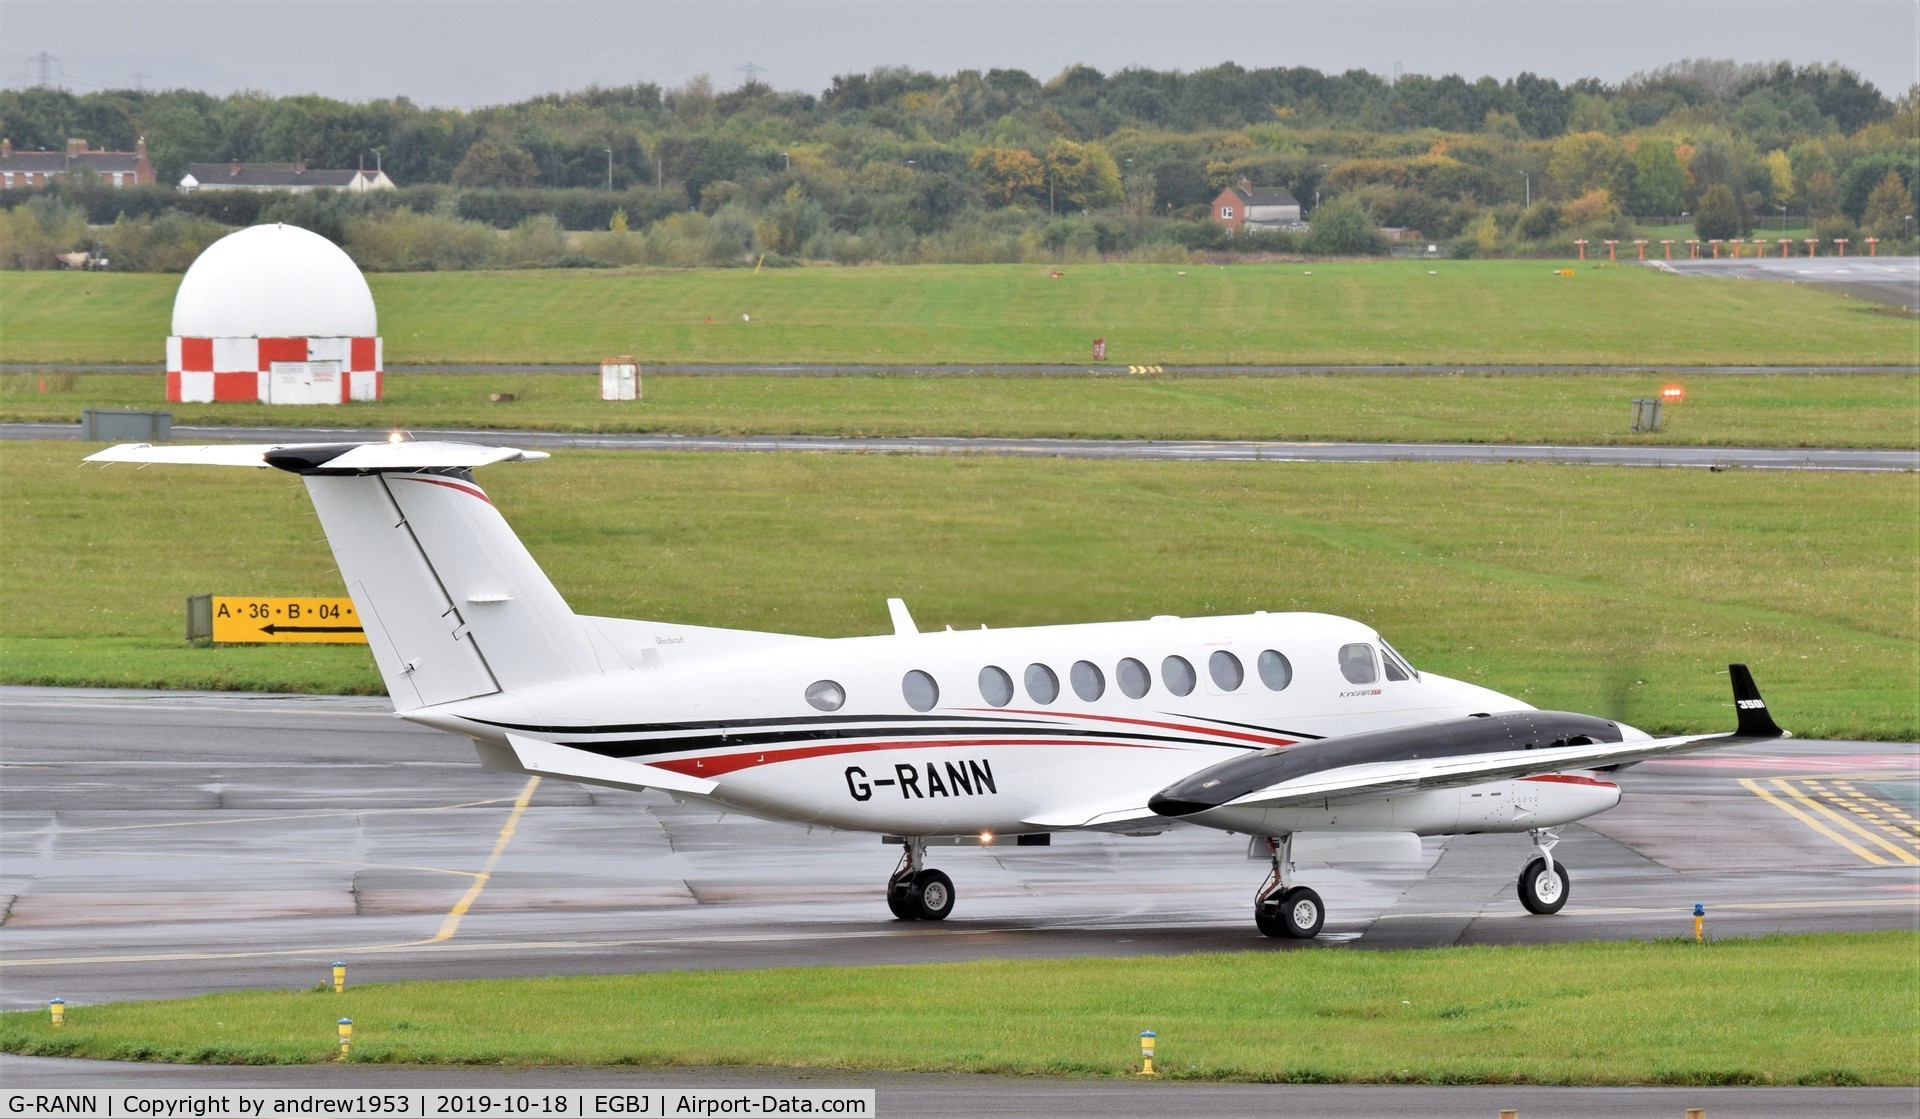 G-RANN, 2013 Beech B300 King Air King Air C/N FL-899, G-RANN at Gloucestershire Airport.